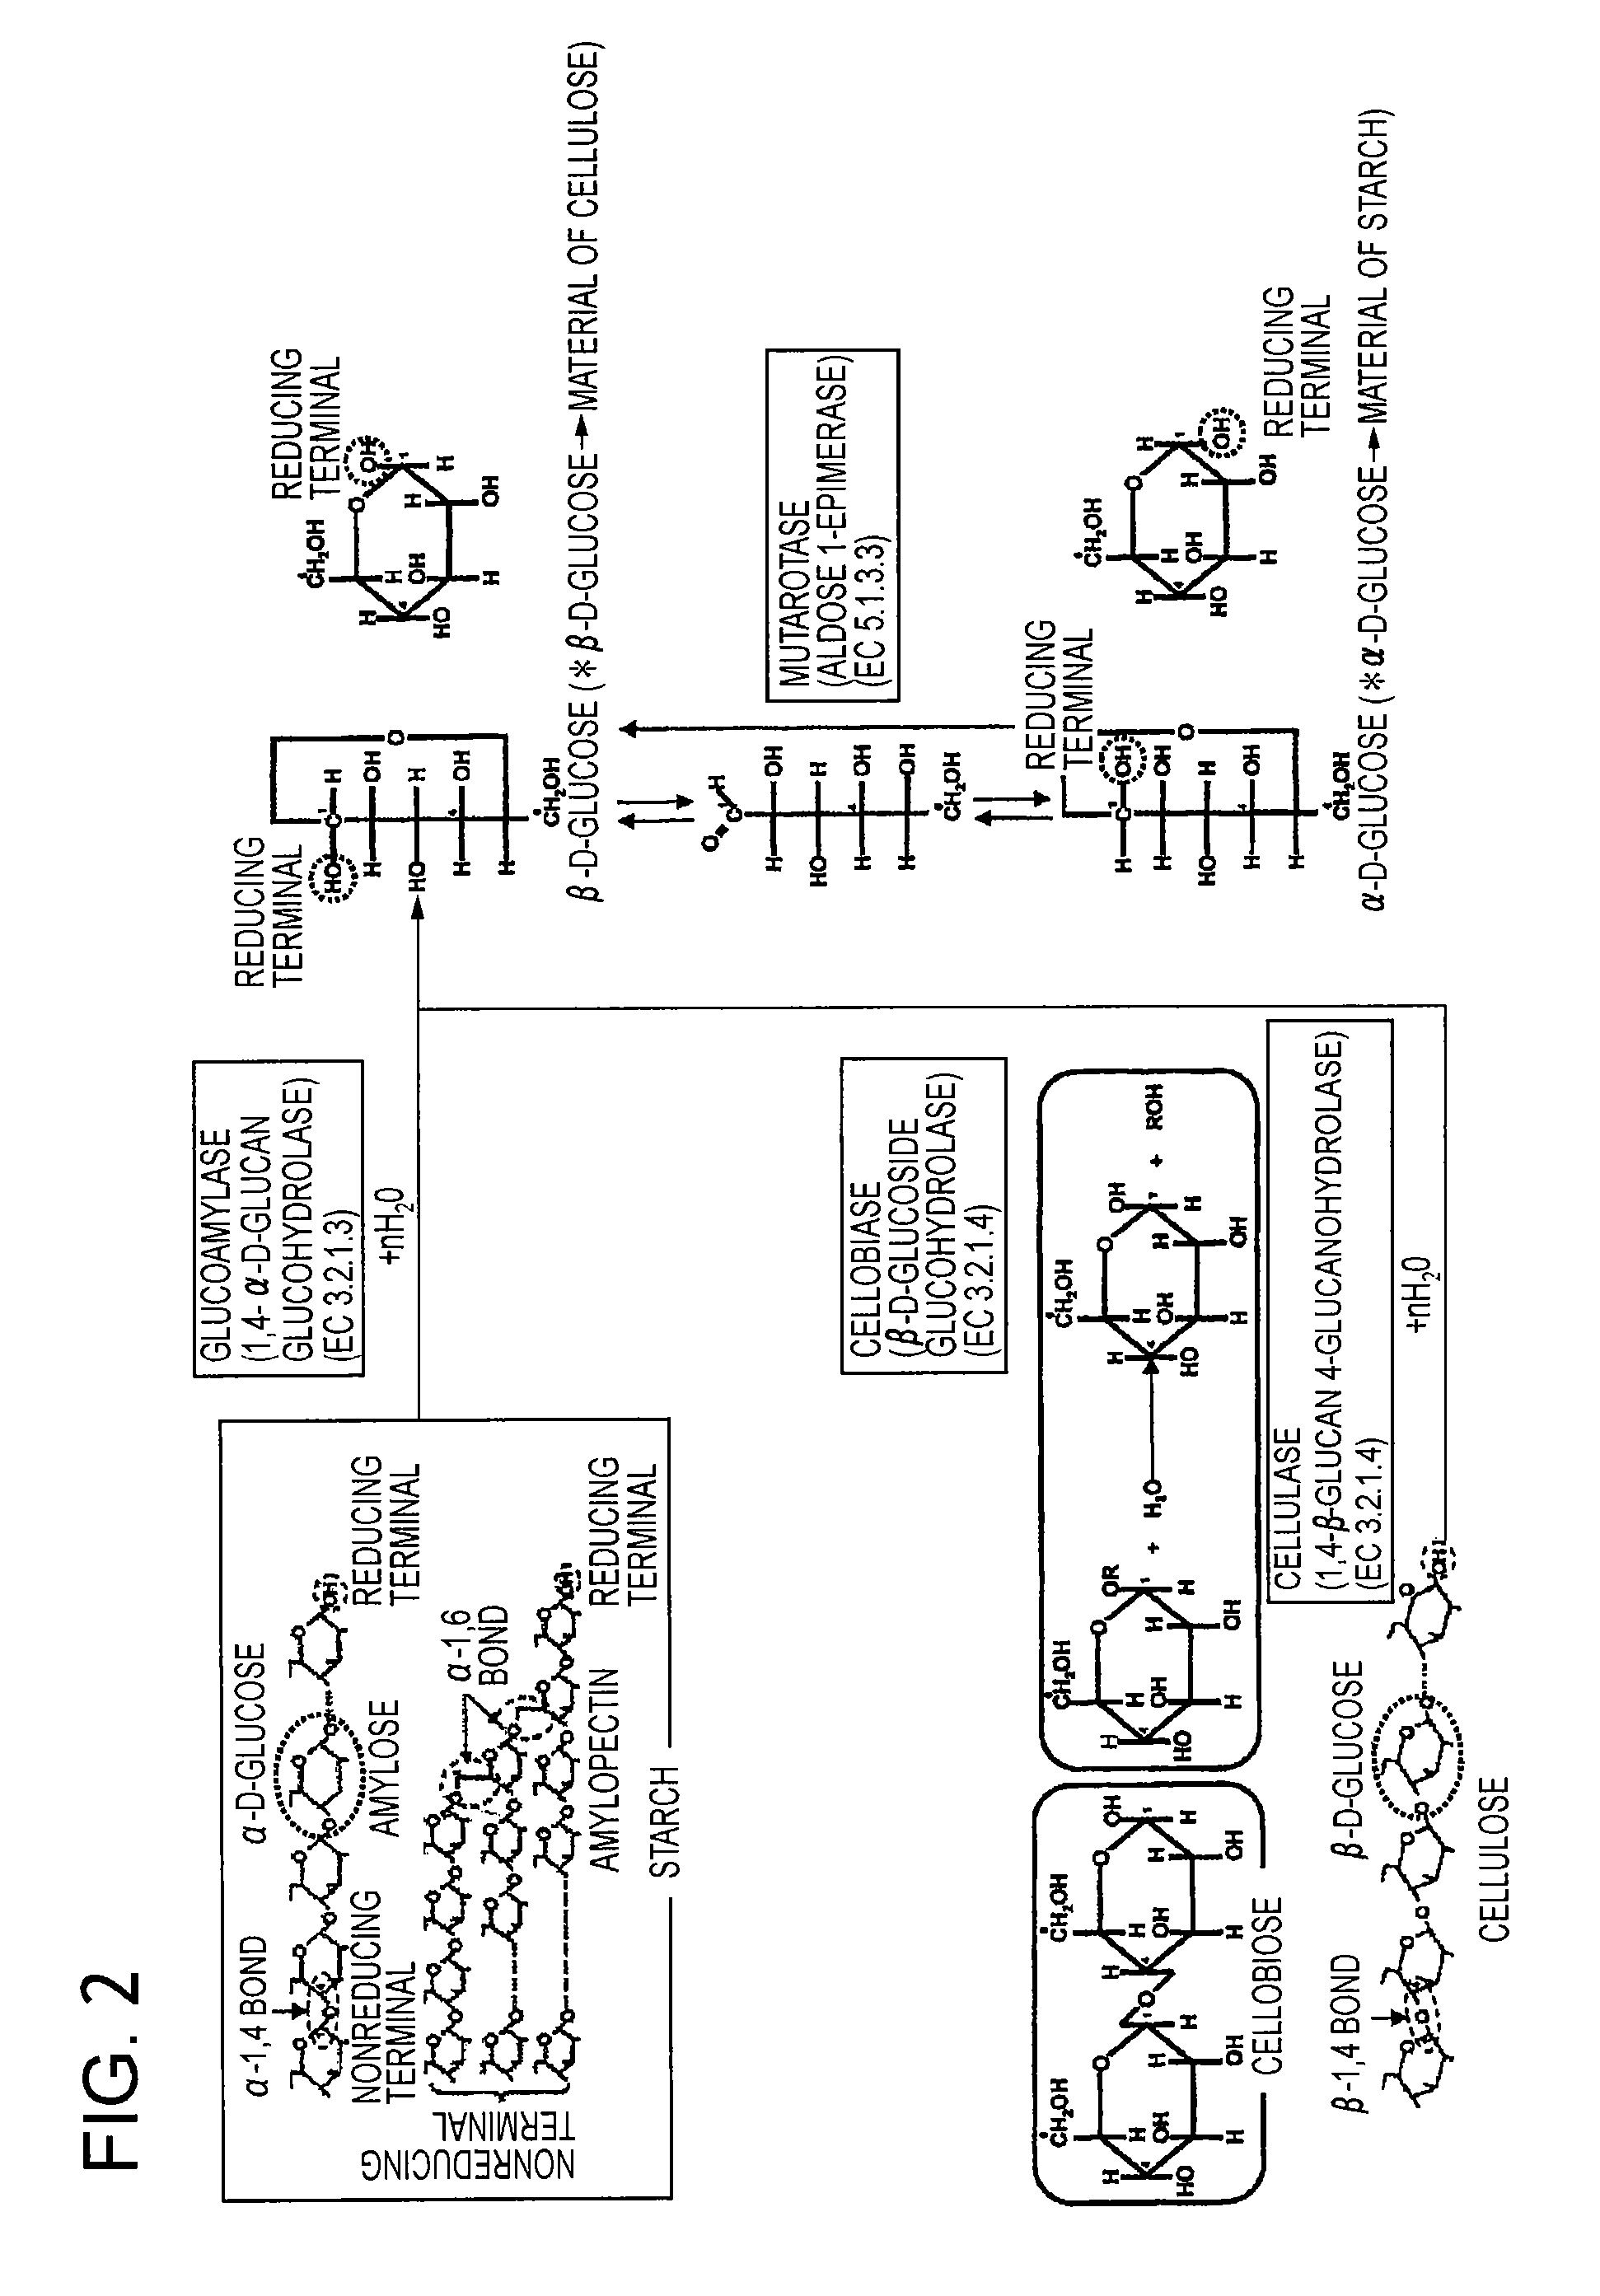 Fuel cell, electronic device, movable body, power generation system, and congeneration system